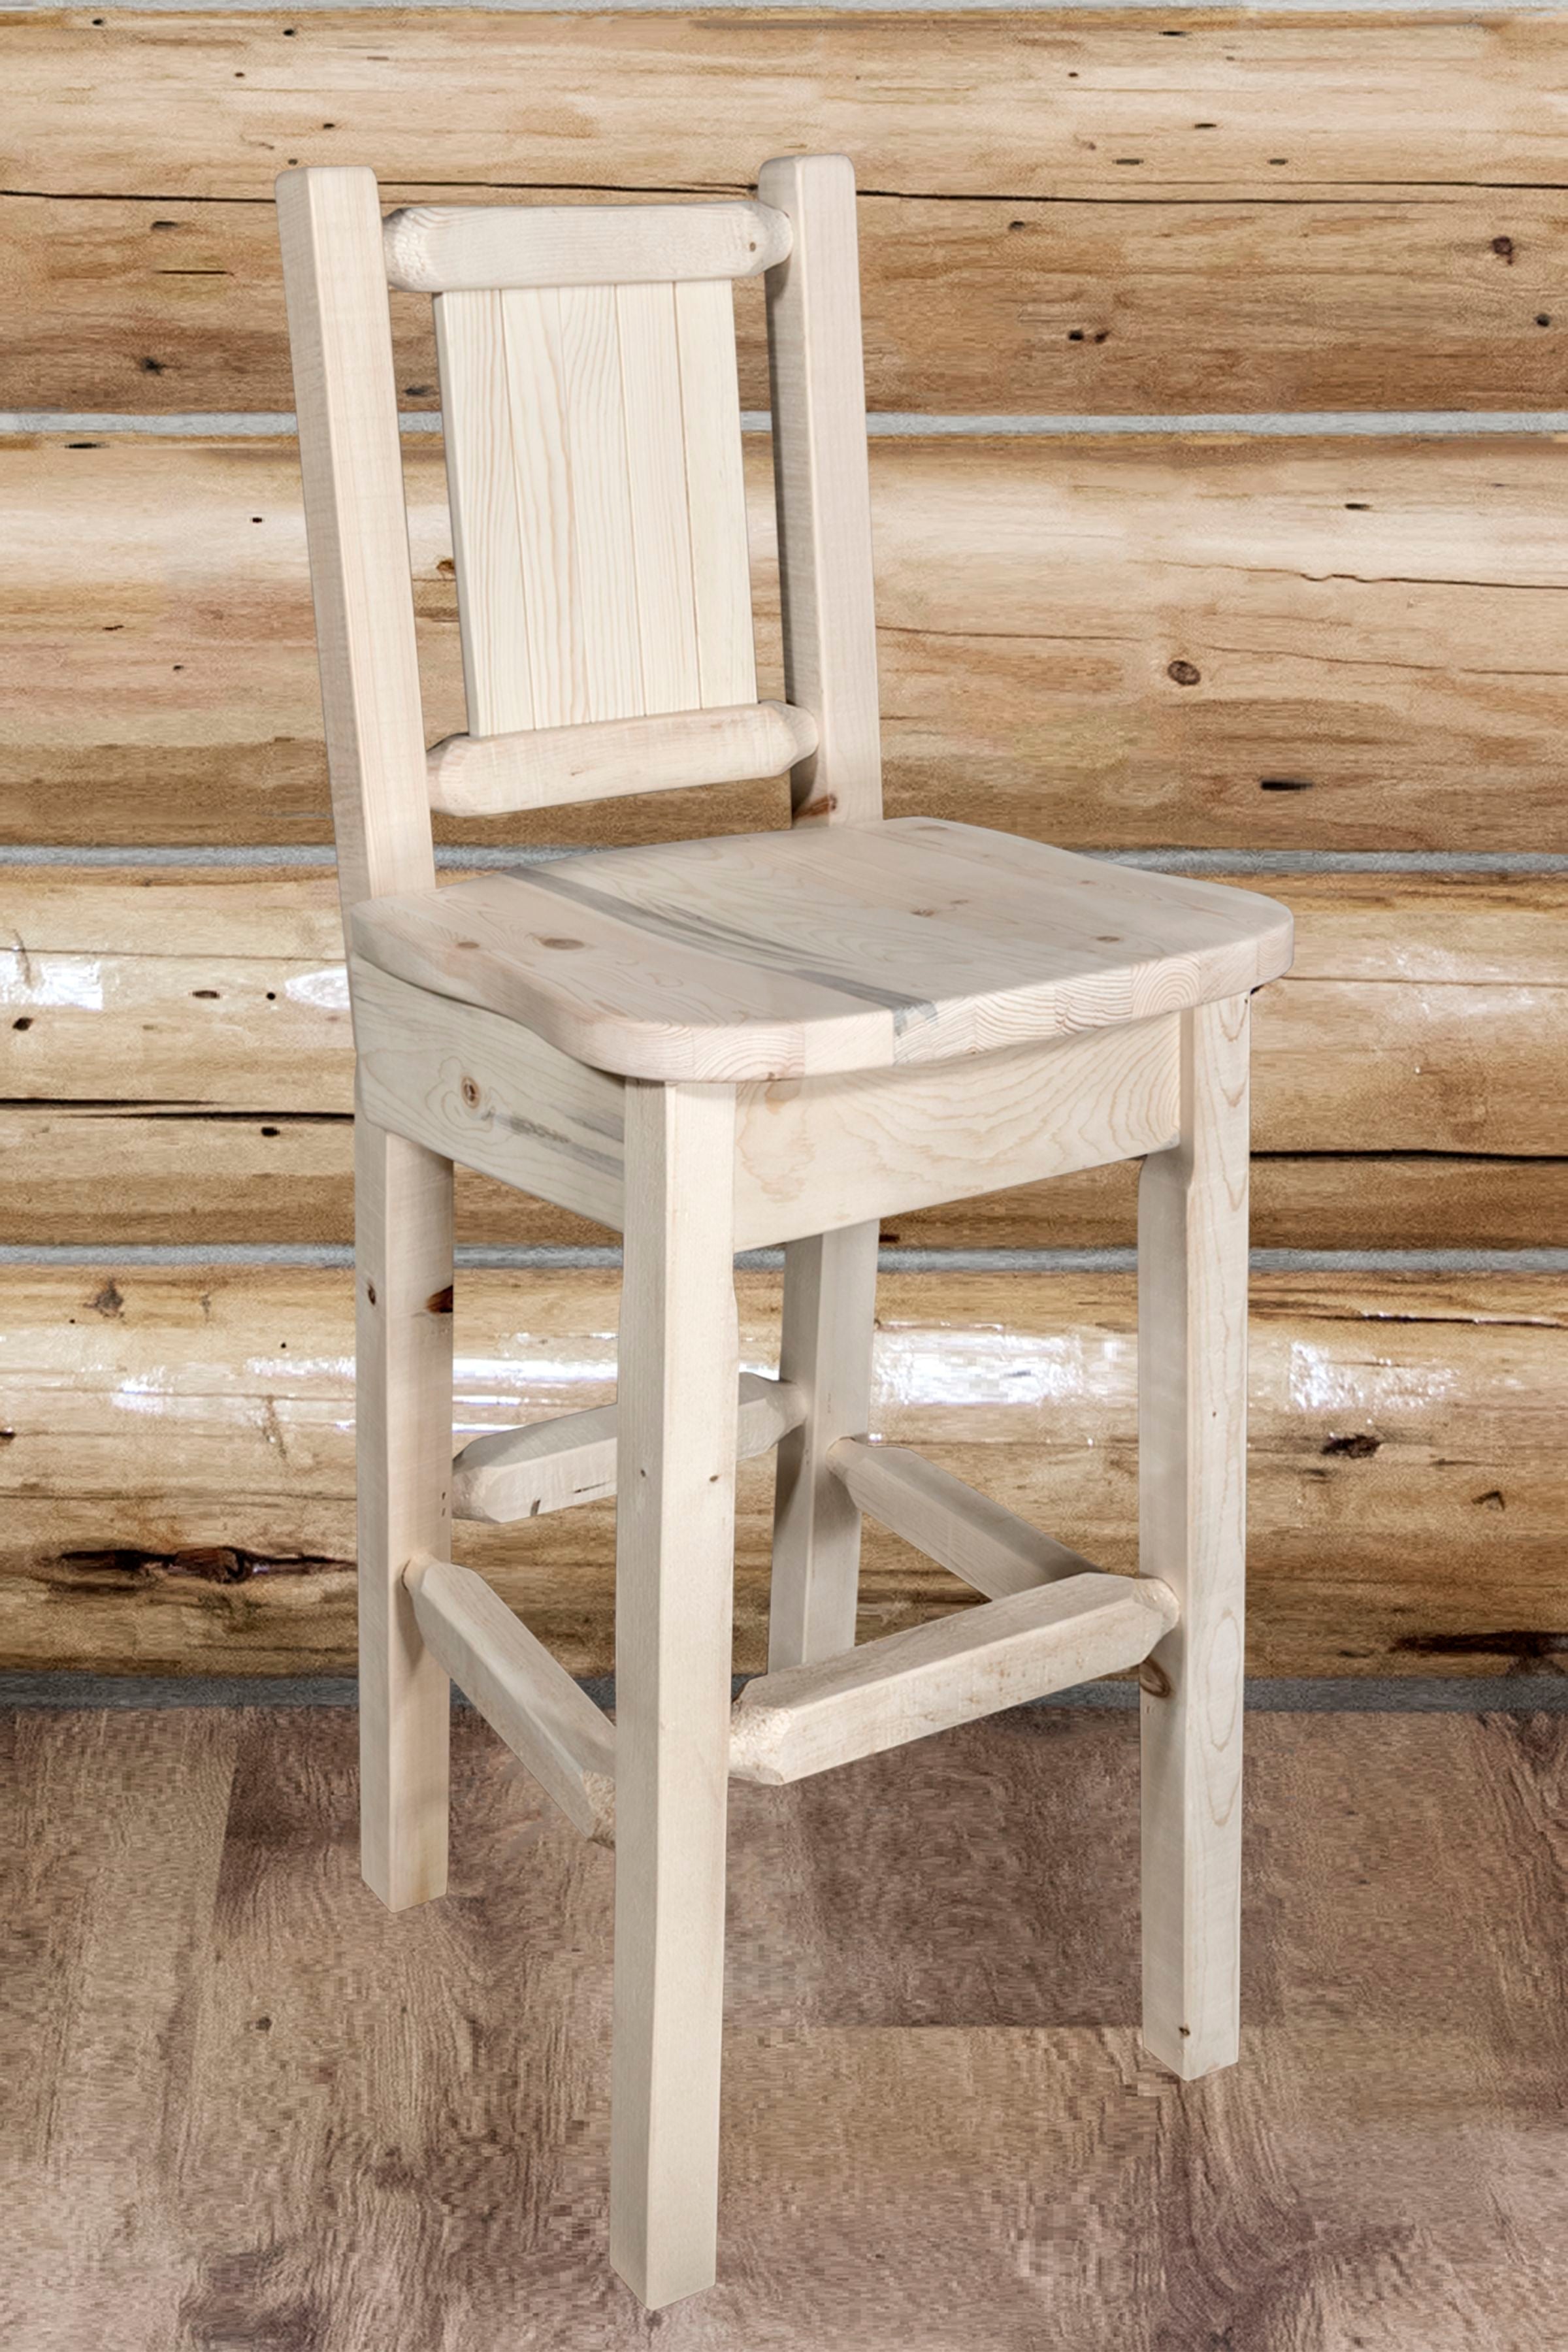 Montana Woodworks Homestead Collection Counter Height Barstool w/ Back, w/ Laser Engraved Bear Design